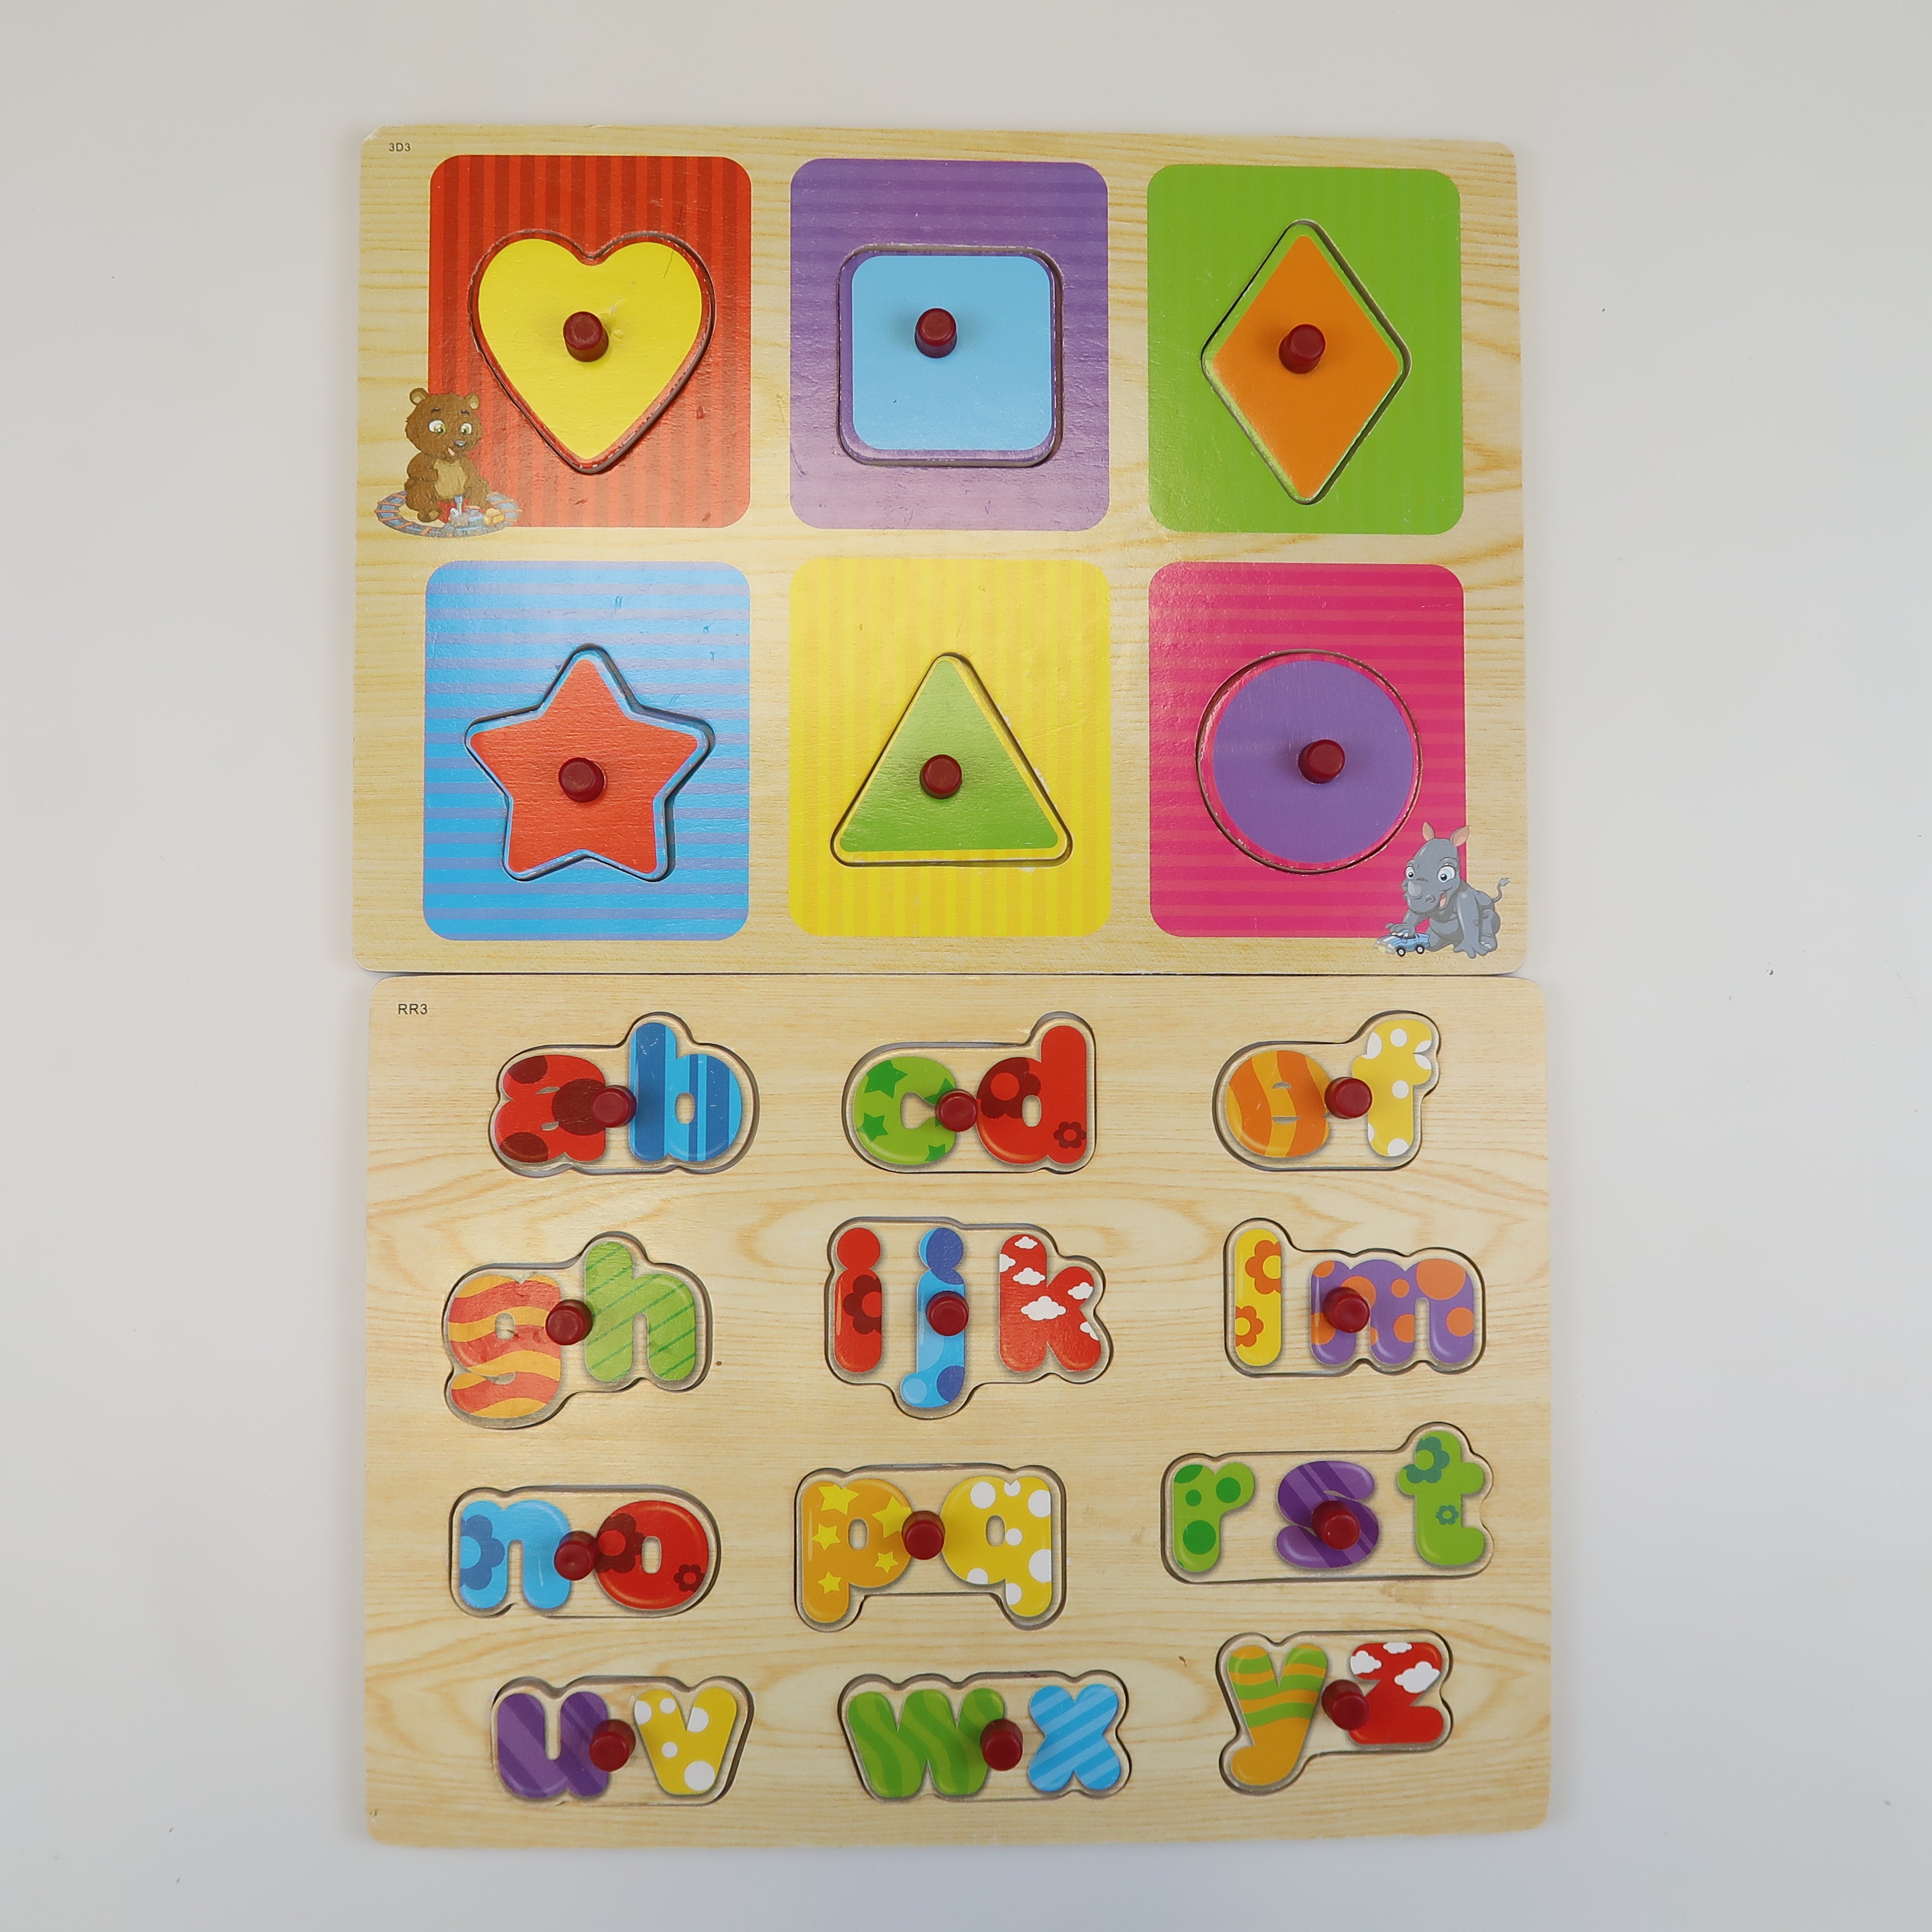 Unknown Brand - Wooden Puzzle